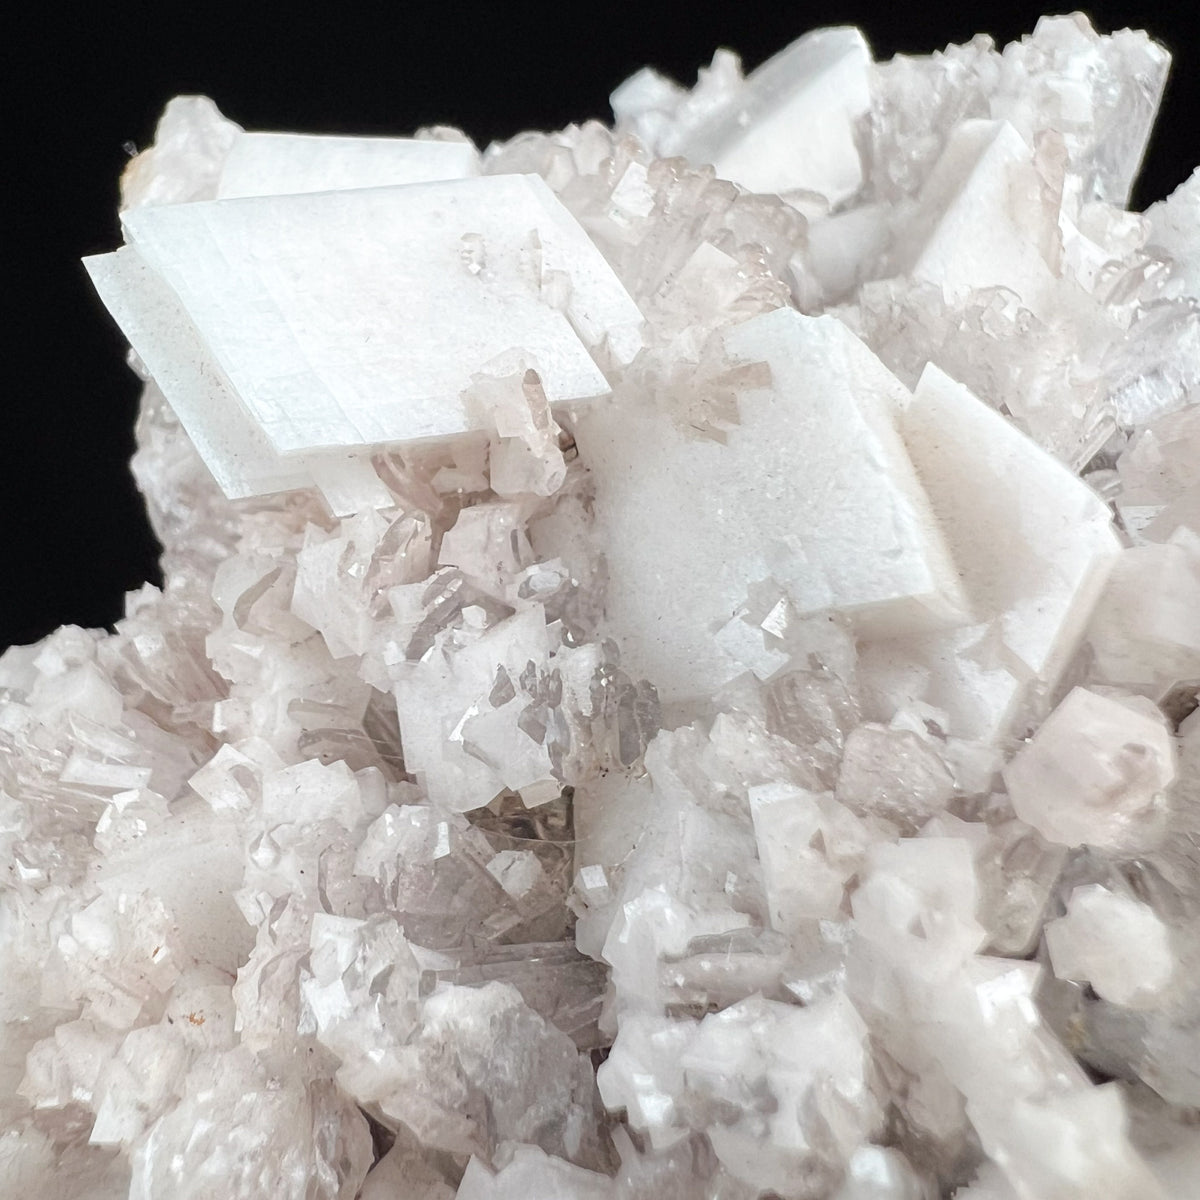 Crystals of Hemimorphite intergrowing with Dolomite Crystals